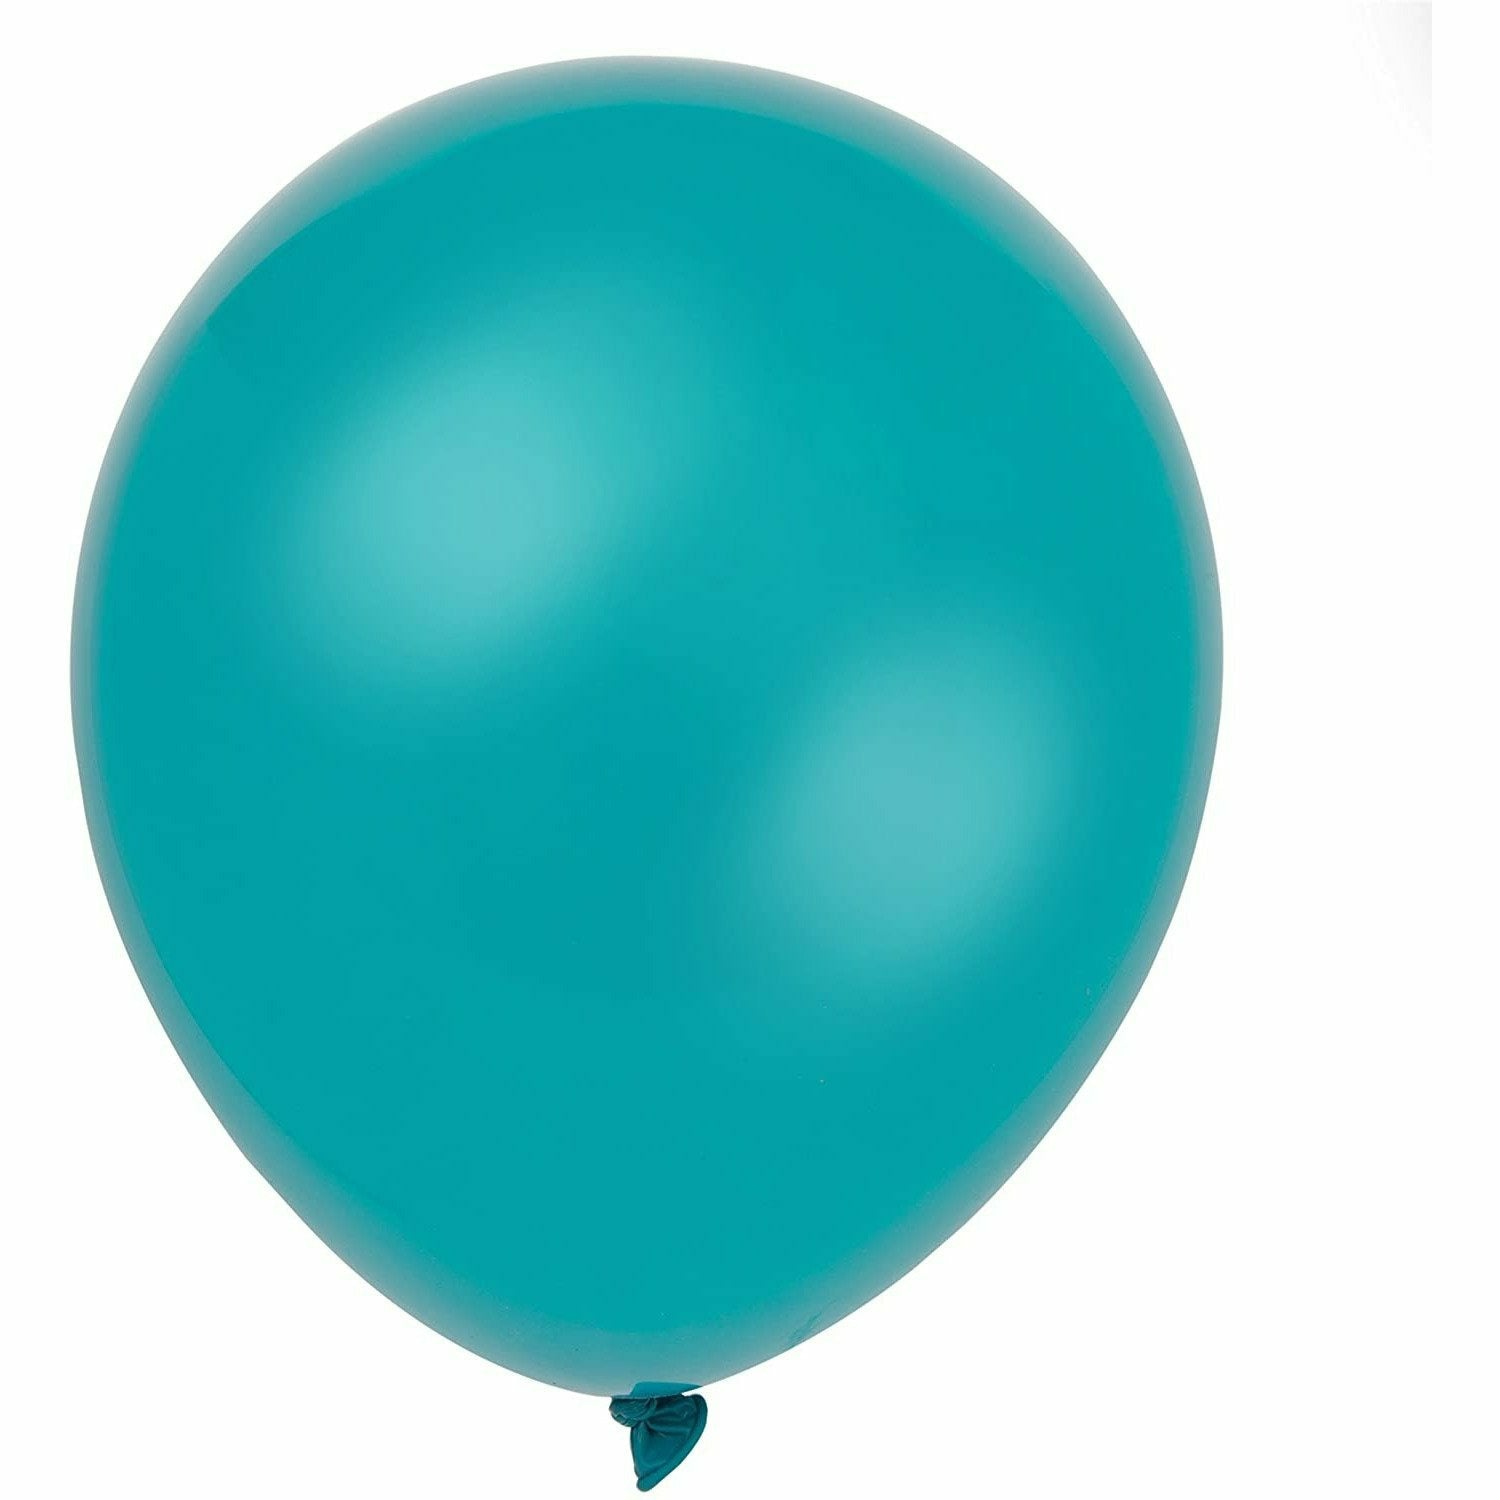 Unique Industries BALLOONS 12" Latex Balloons - Teal 10ct